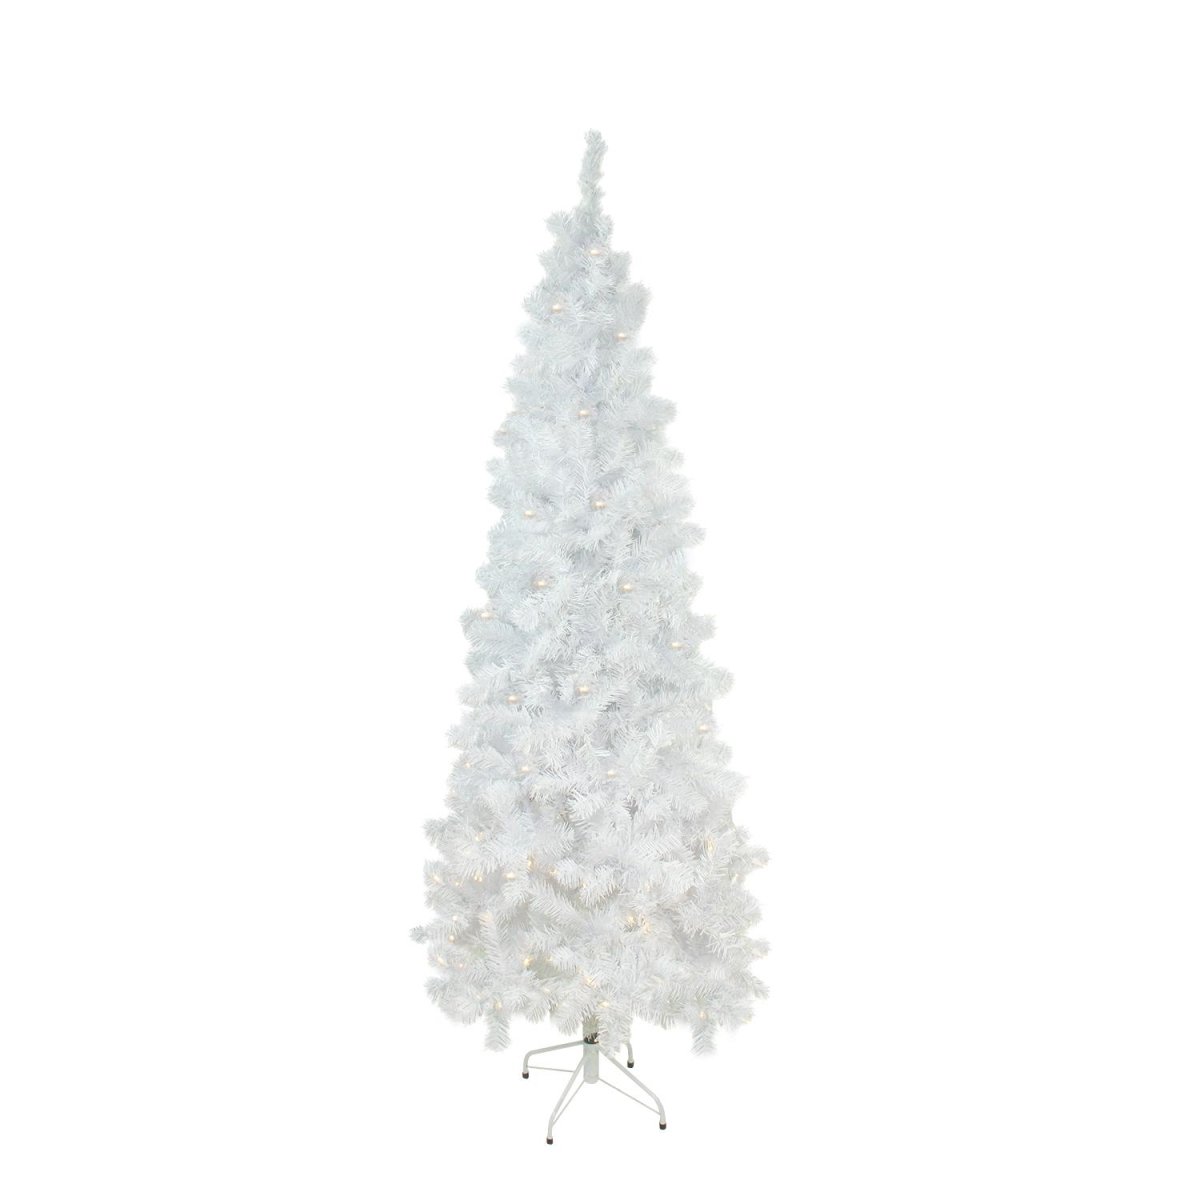 UPC 715833000072 product image for 32265418 7.5 ft. x 36 in. Pre-Lit White Winston Pine Artificial Christmas Tree - | upcitemdb.com